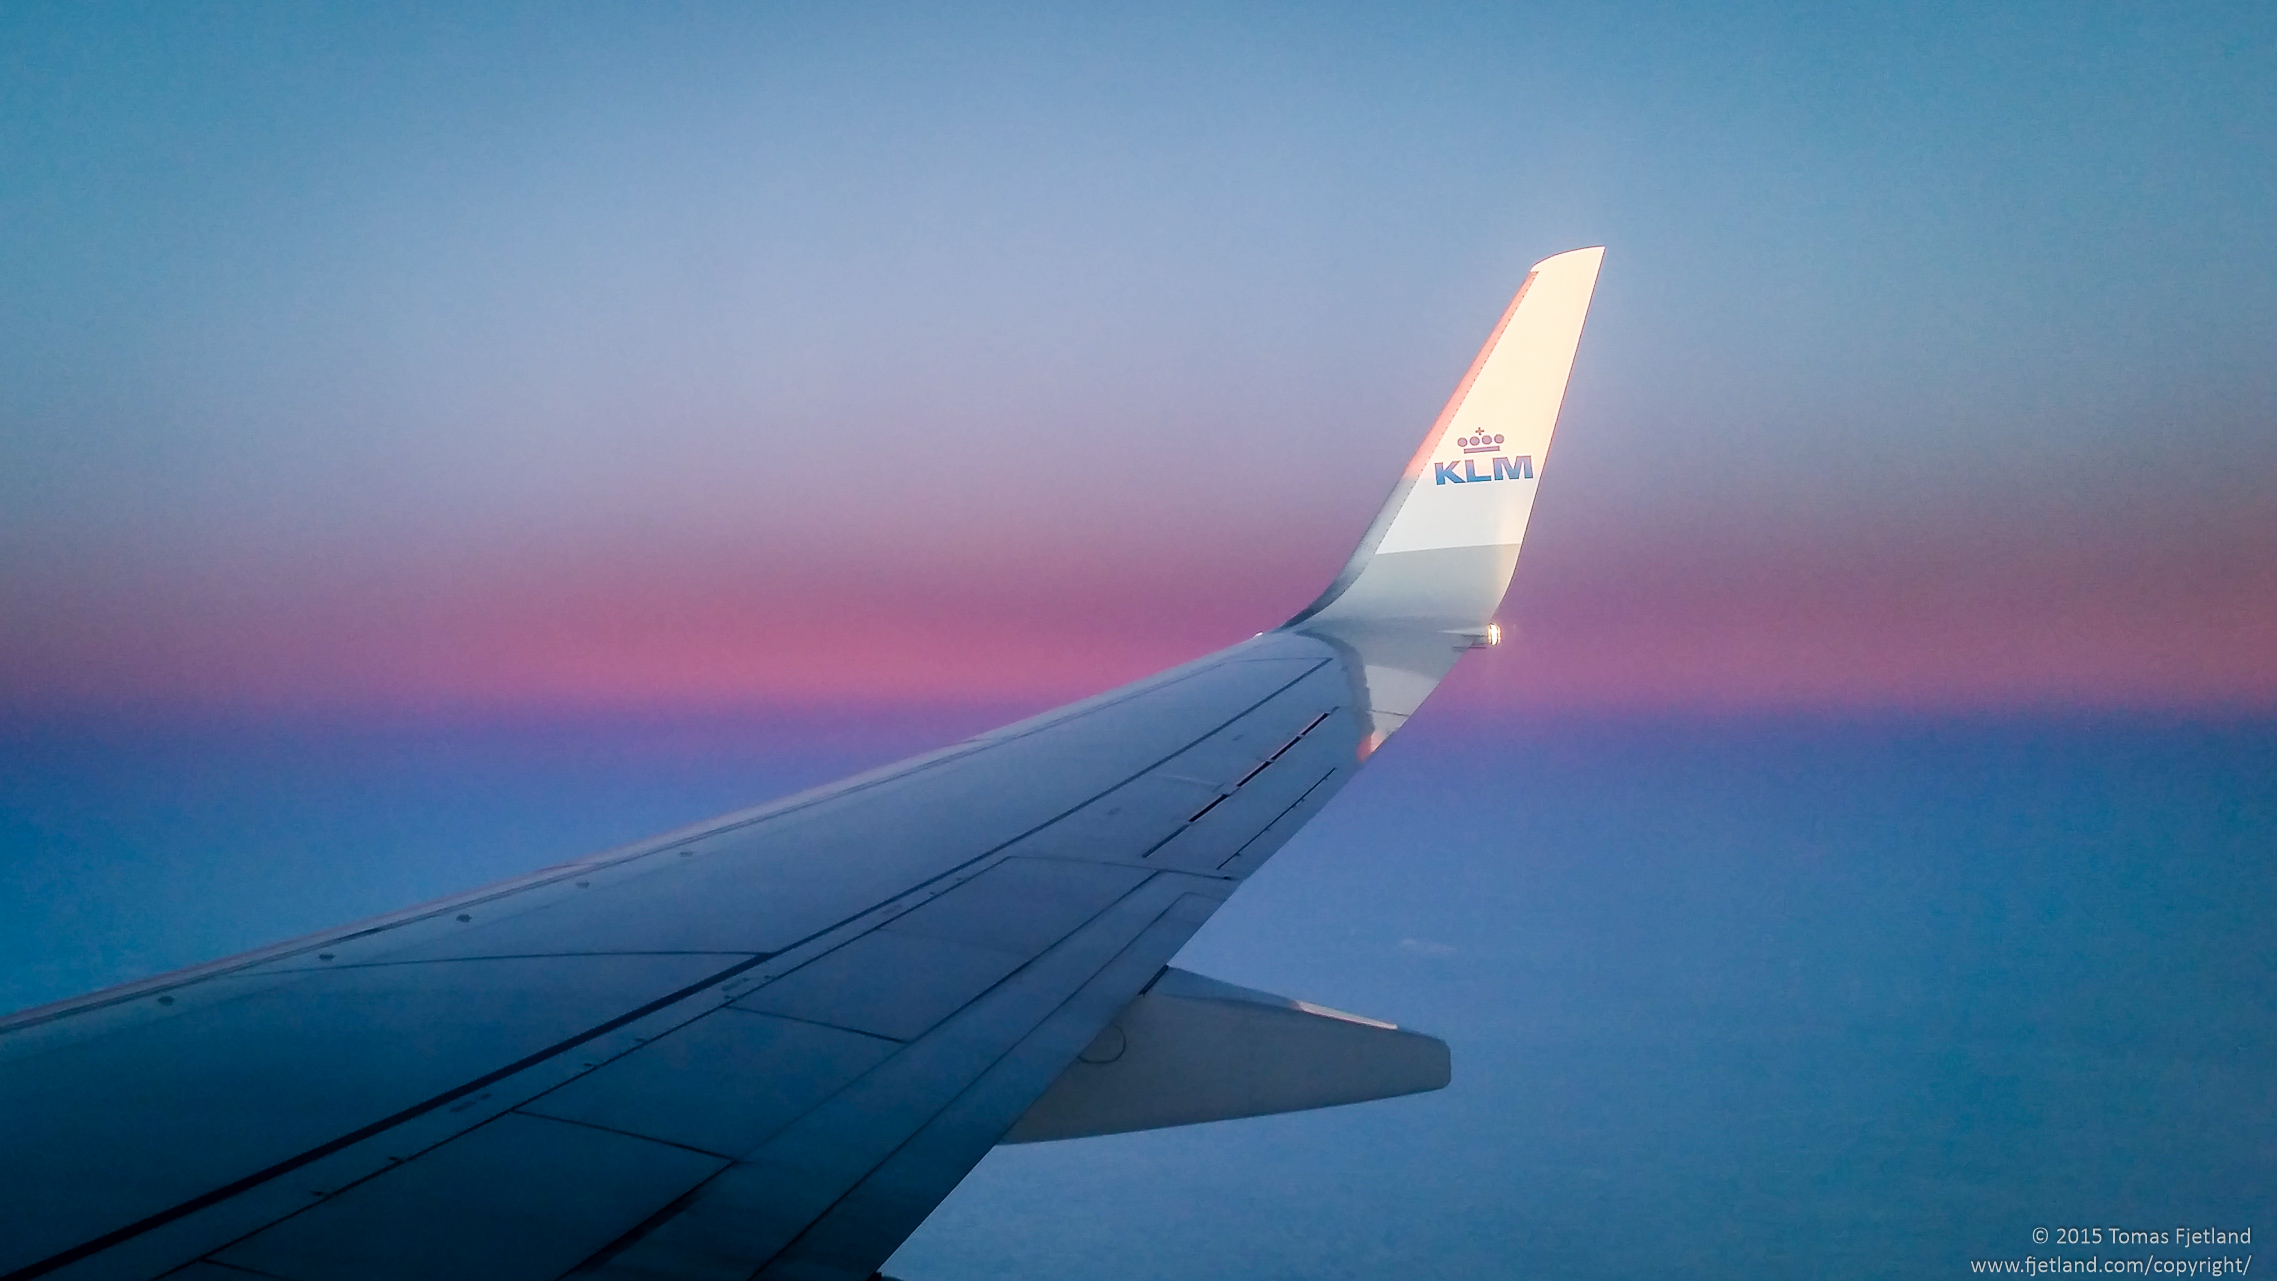 Watching the sun rise before we land in Amsterdam on the way to Nairobi